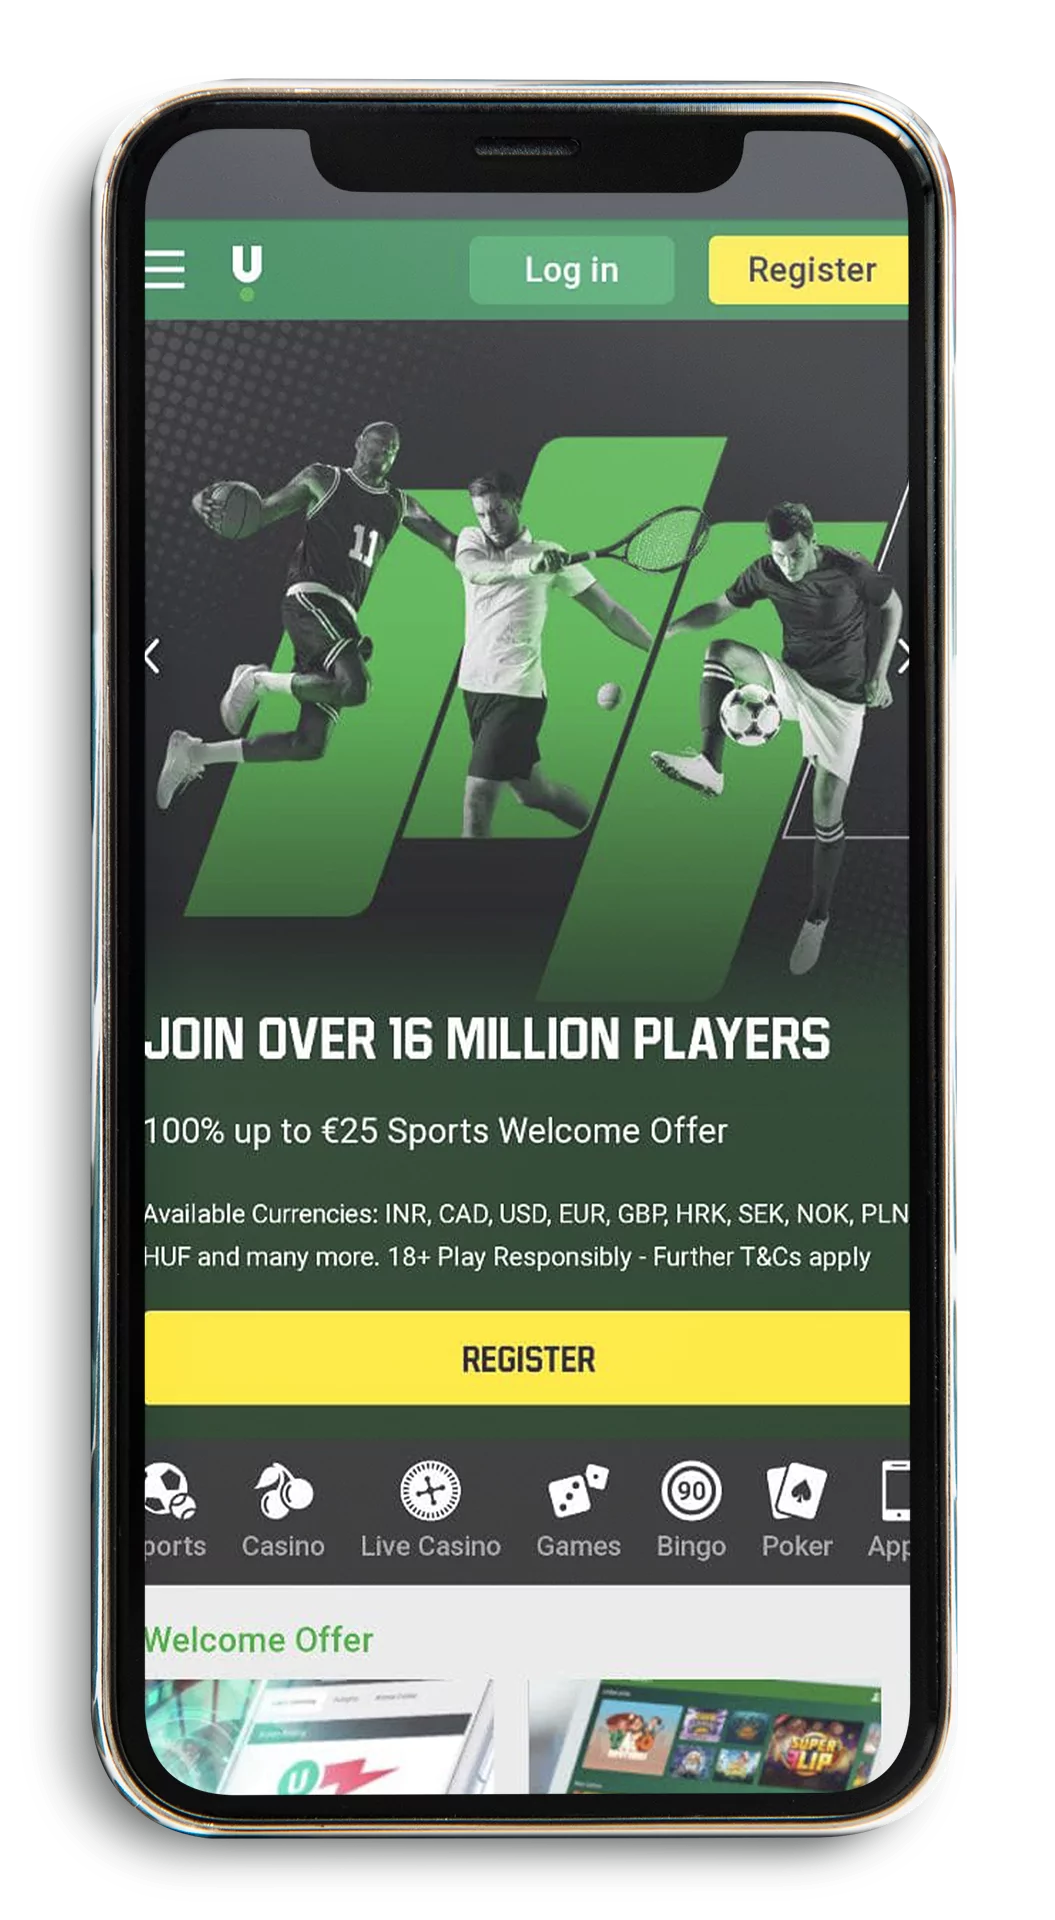 Be sure, that you register at the official Unibet website.